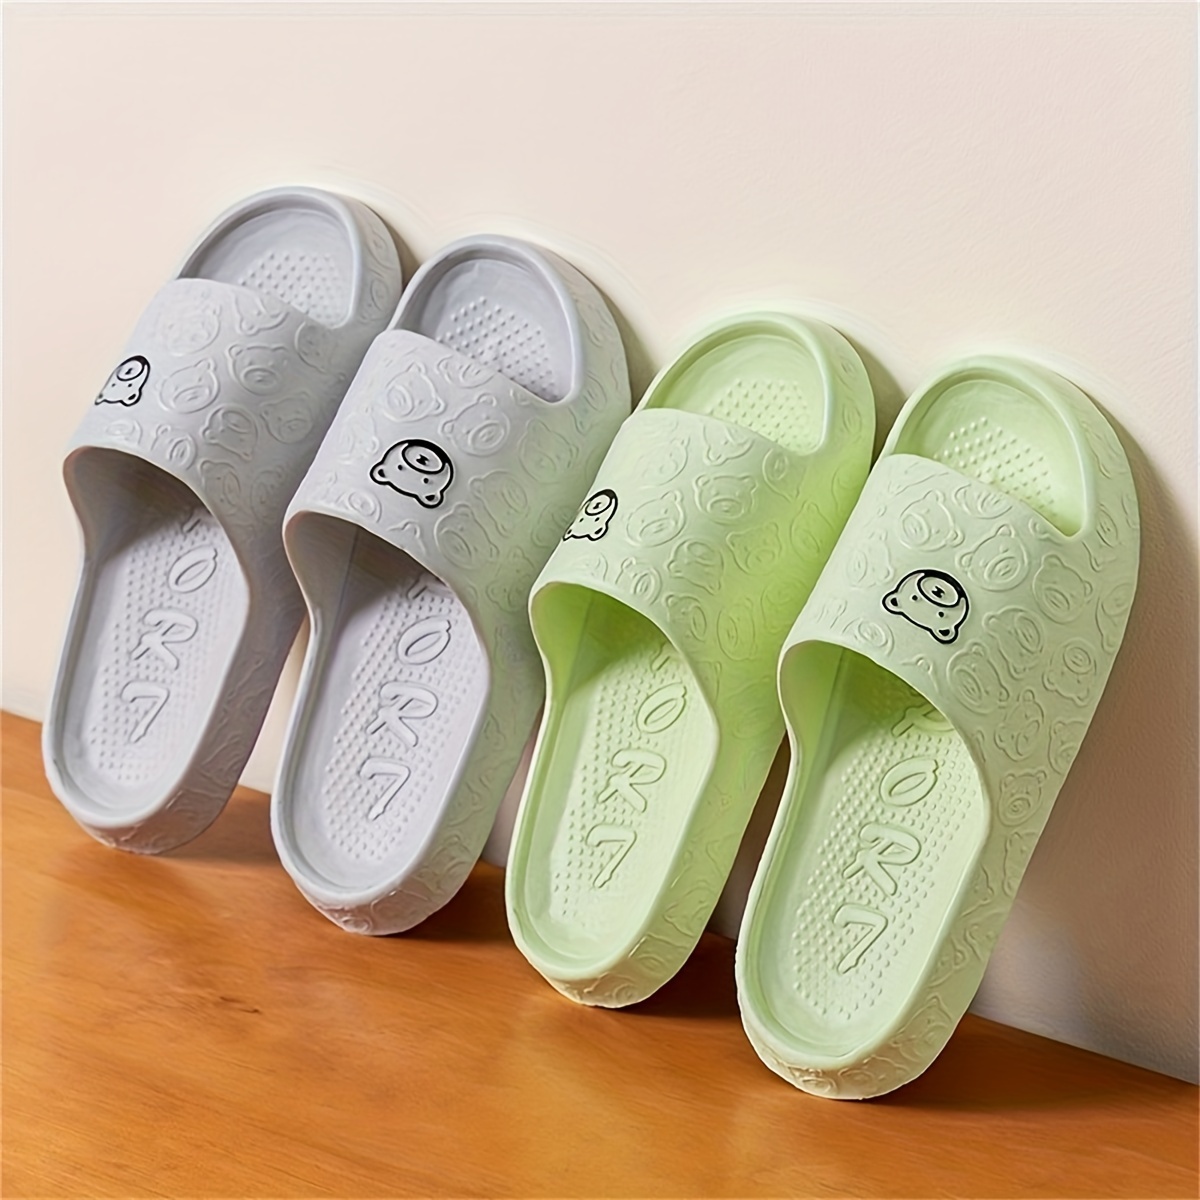 

Cute Bear Eva Pillow Slides, Solid Color Soft Sole Quick Drying Bathroom Shoes, Casual Lightweight Indoor Slides